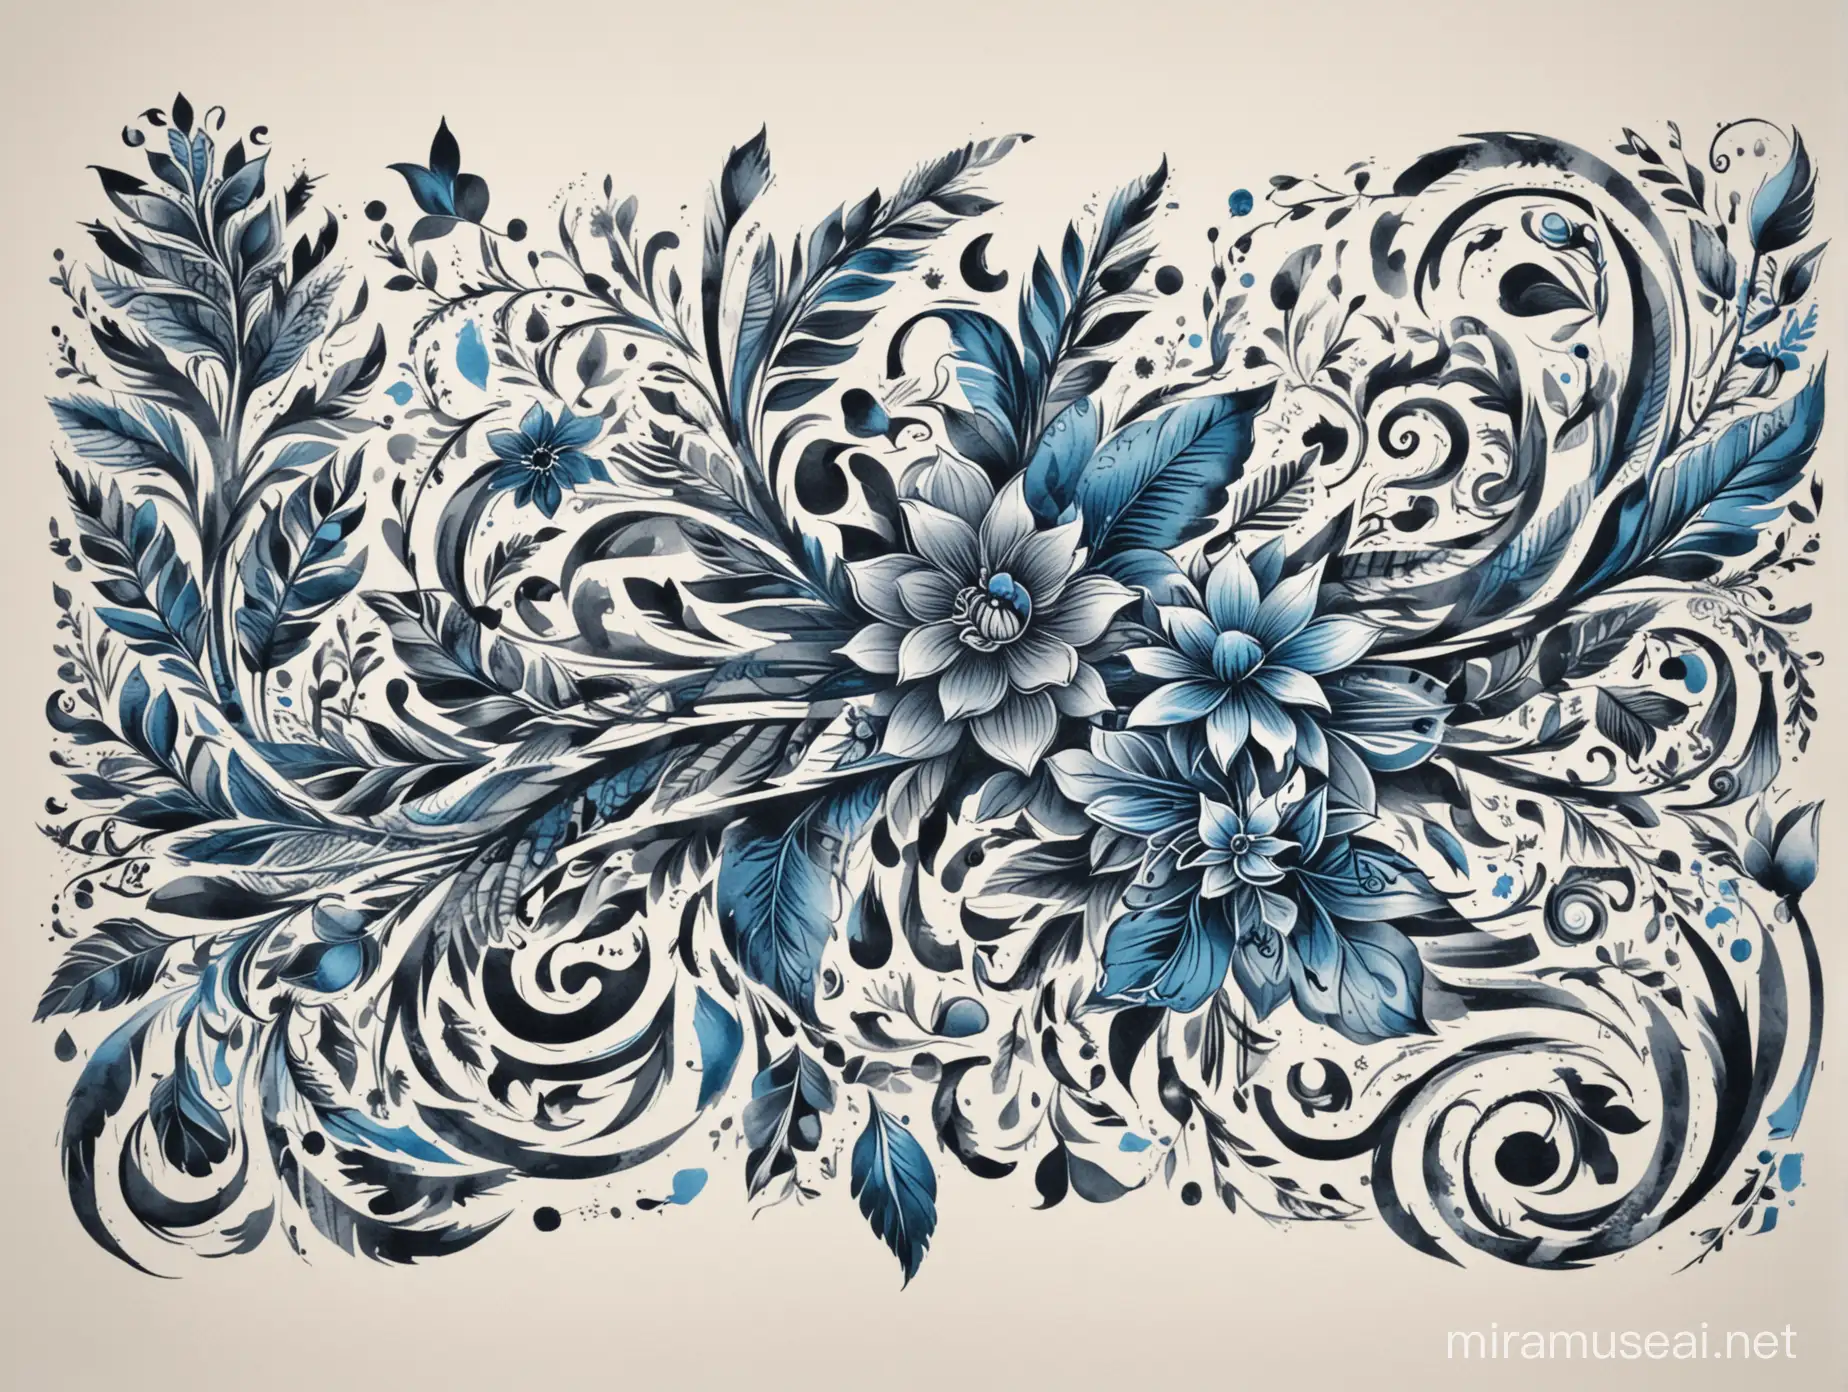 a flat white background contains a vector image, which is a tribal tattoo-style pattern that implies flowers, plants, and musical notes. The vector image is made of blue, grey, and black hues. The image has a flush left side and flush top side to create a ninety degree angle so that the image can fit in the upper left hand corner of a page.